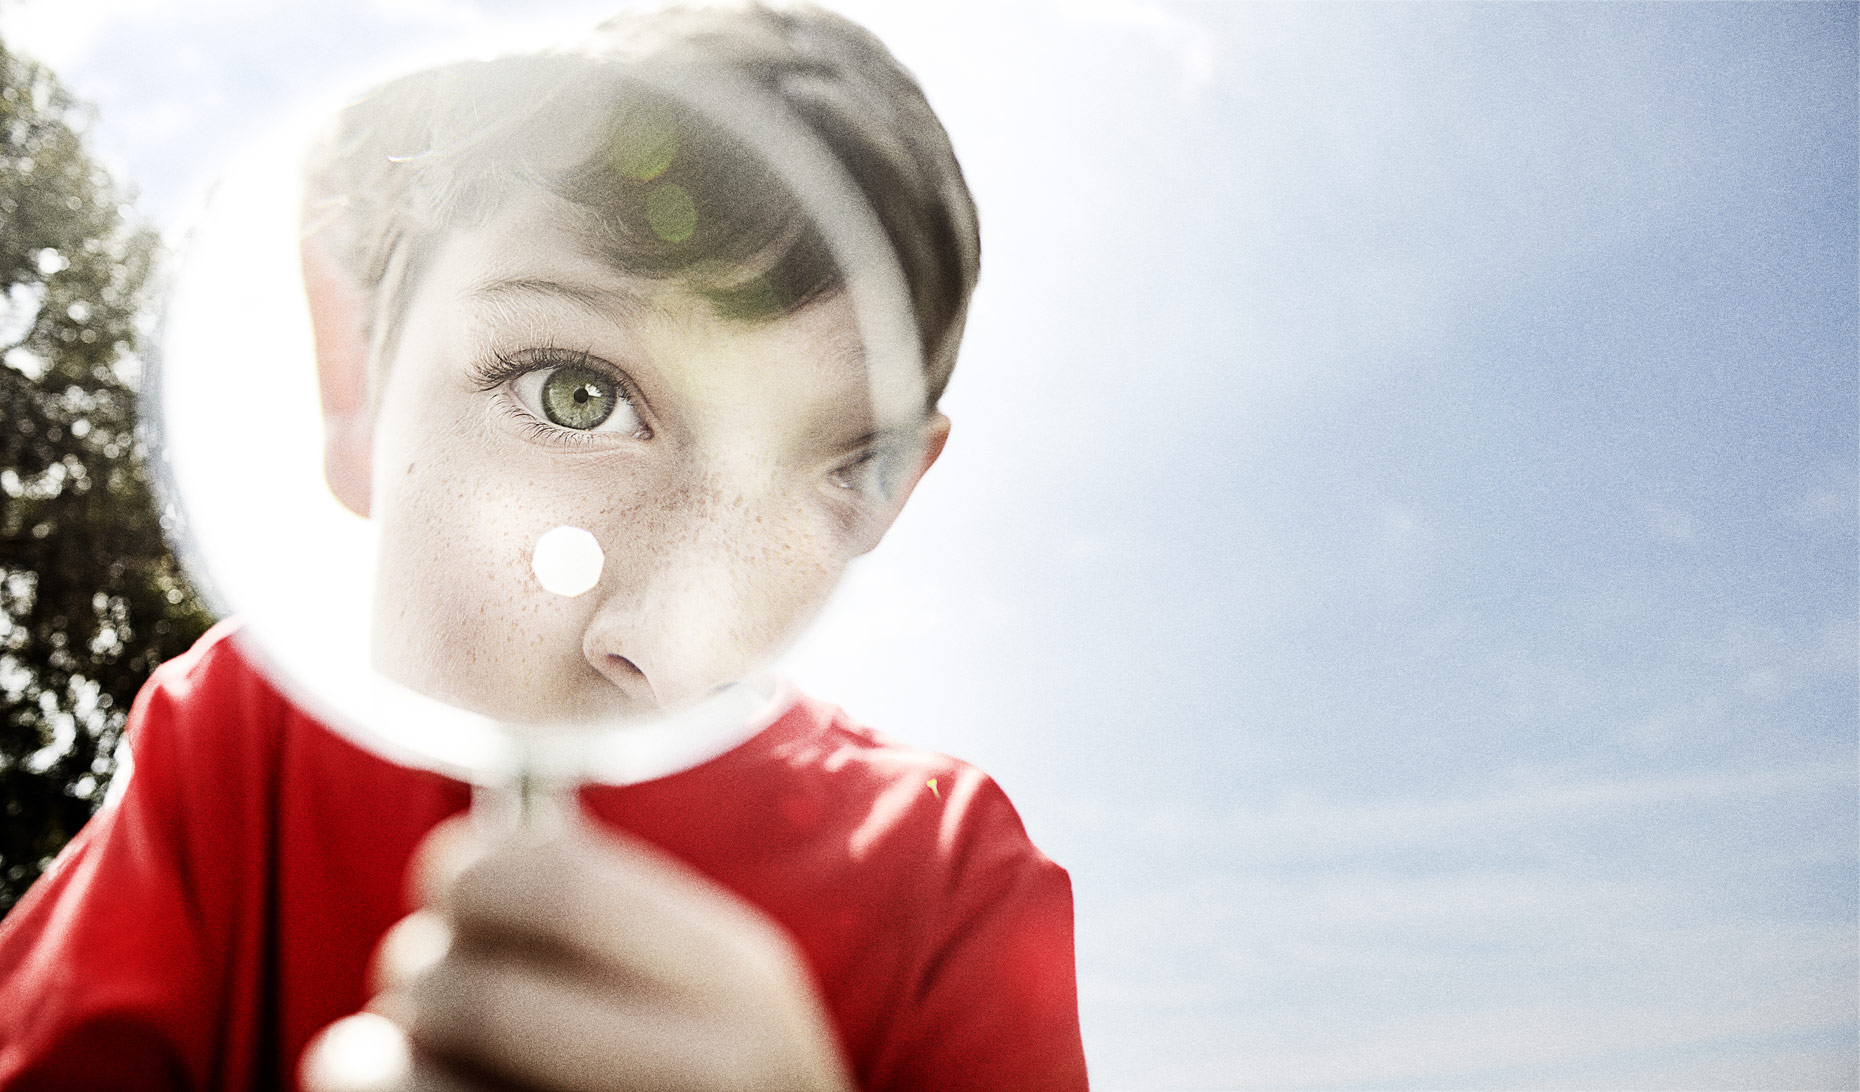 Boy with Magnifying glass